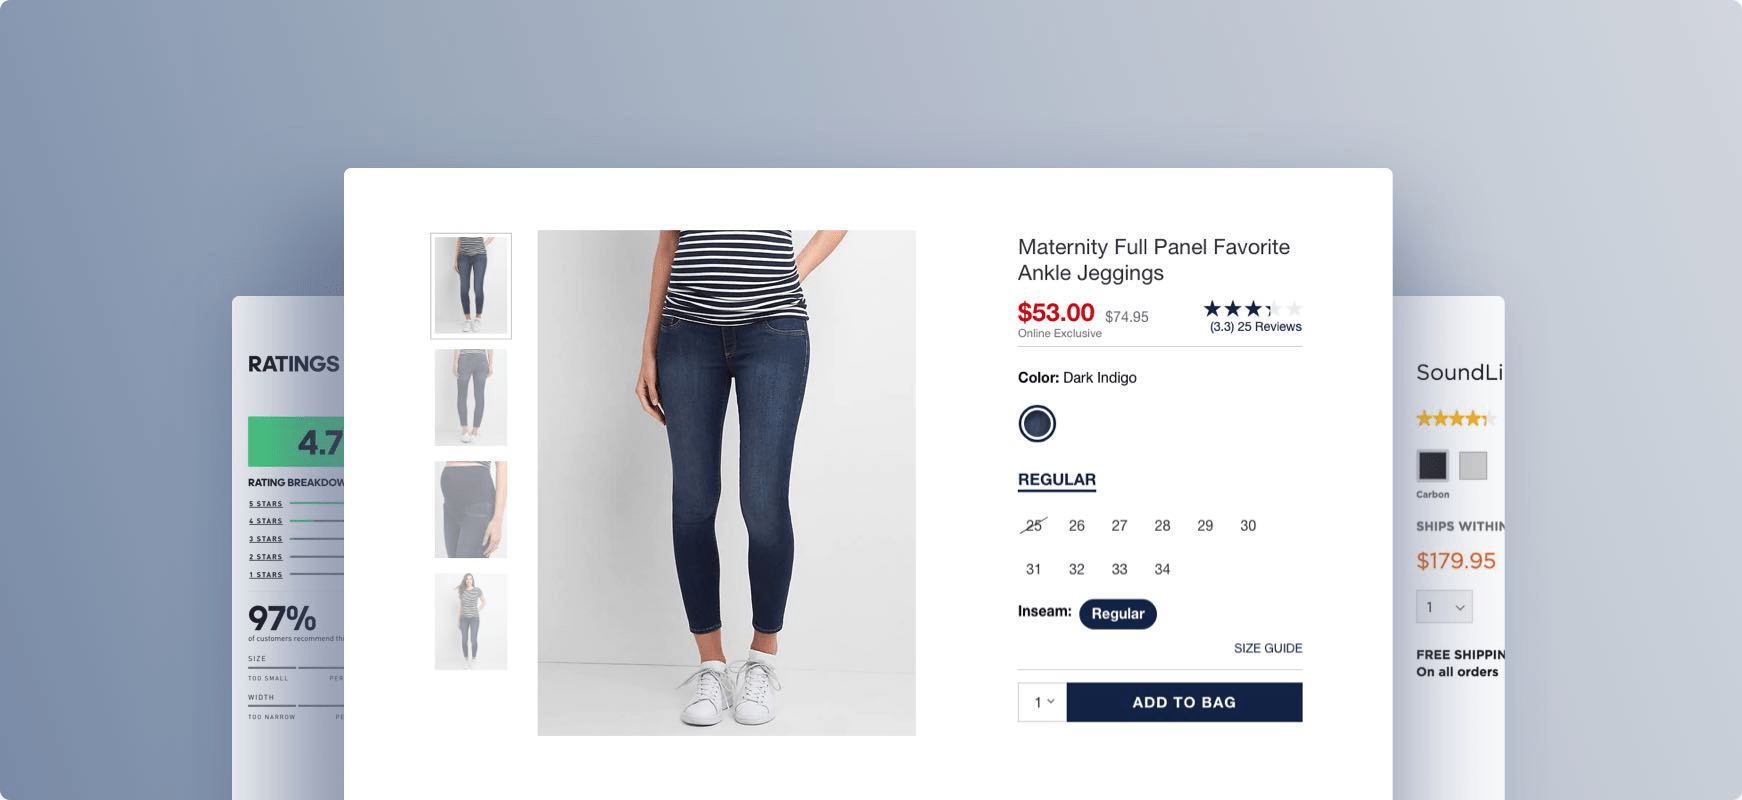 A Step-by-Step Guide to Design a Product Page